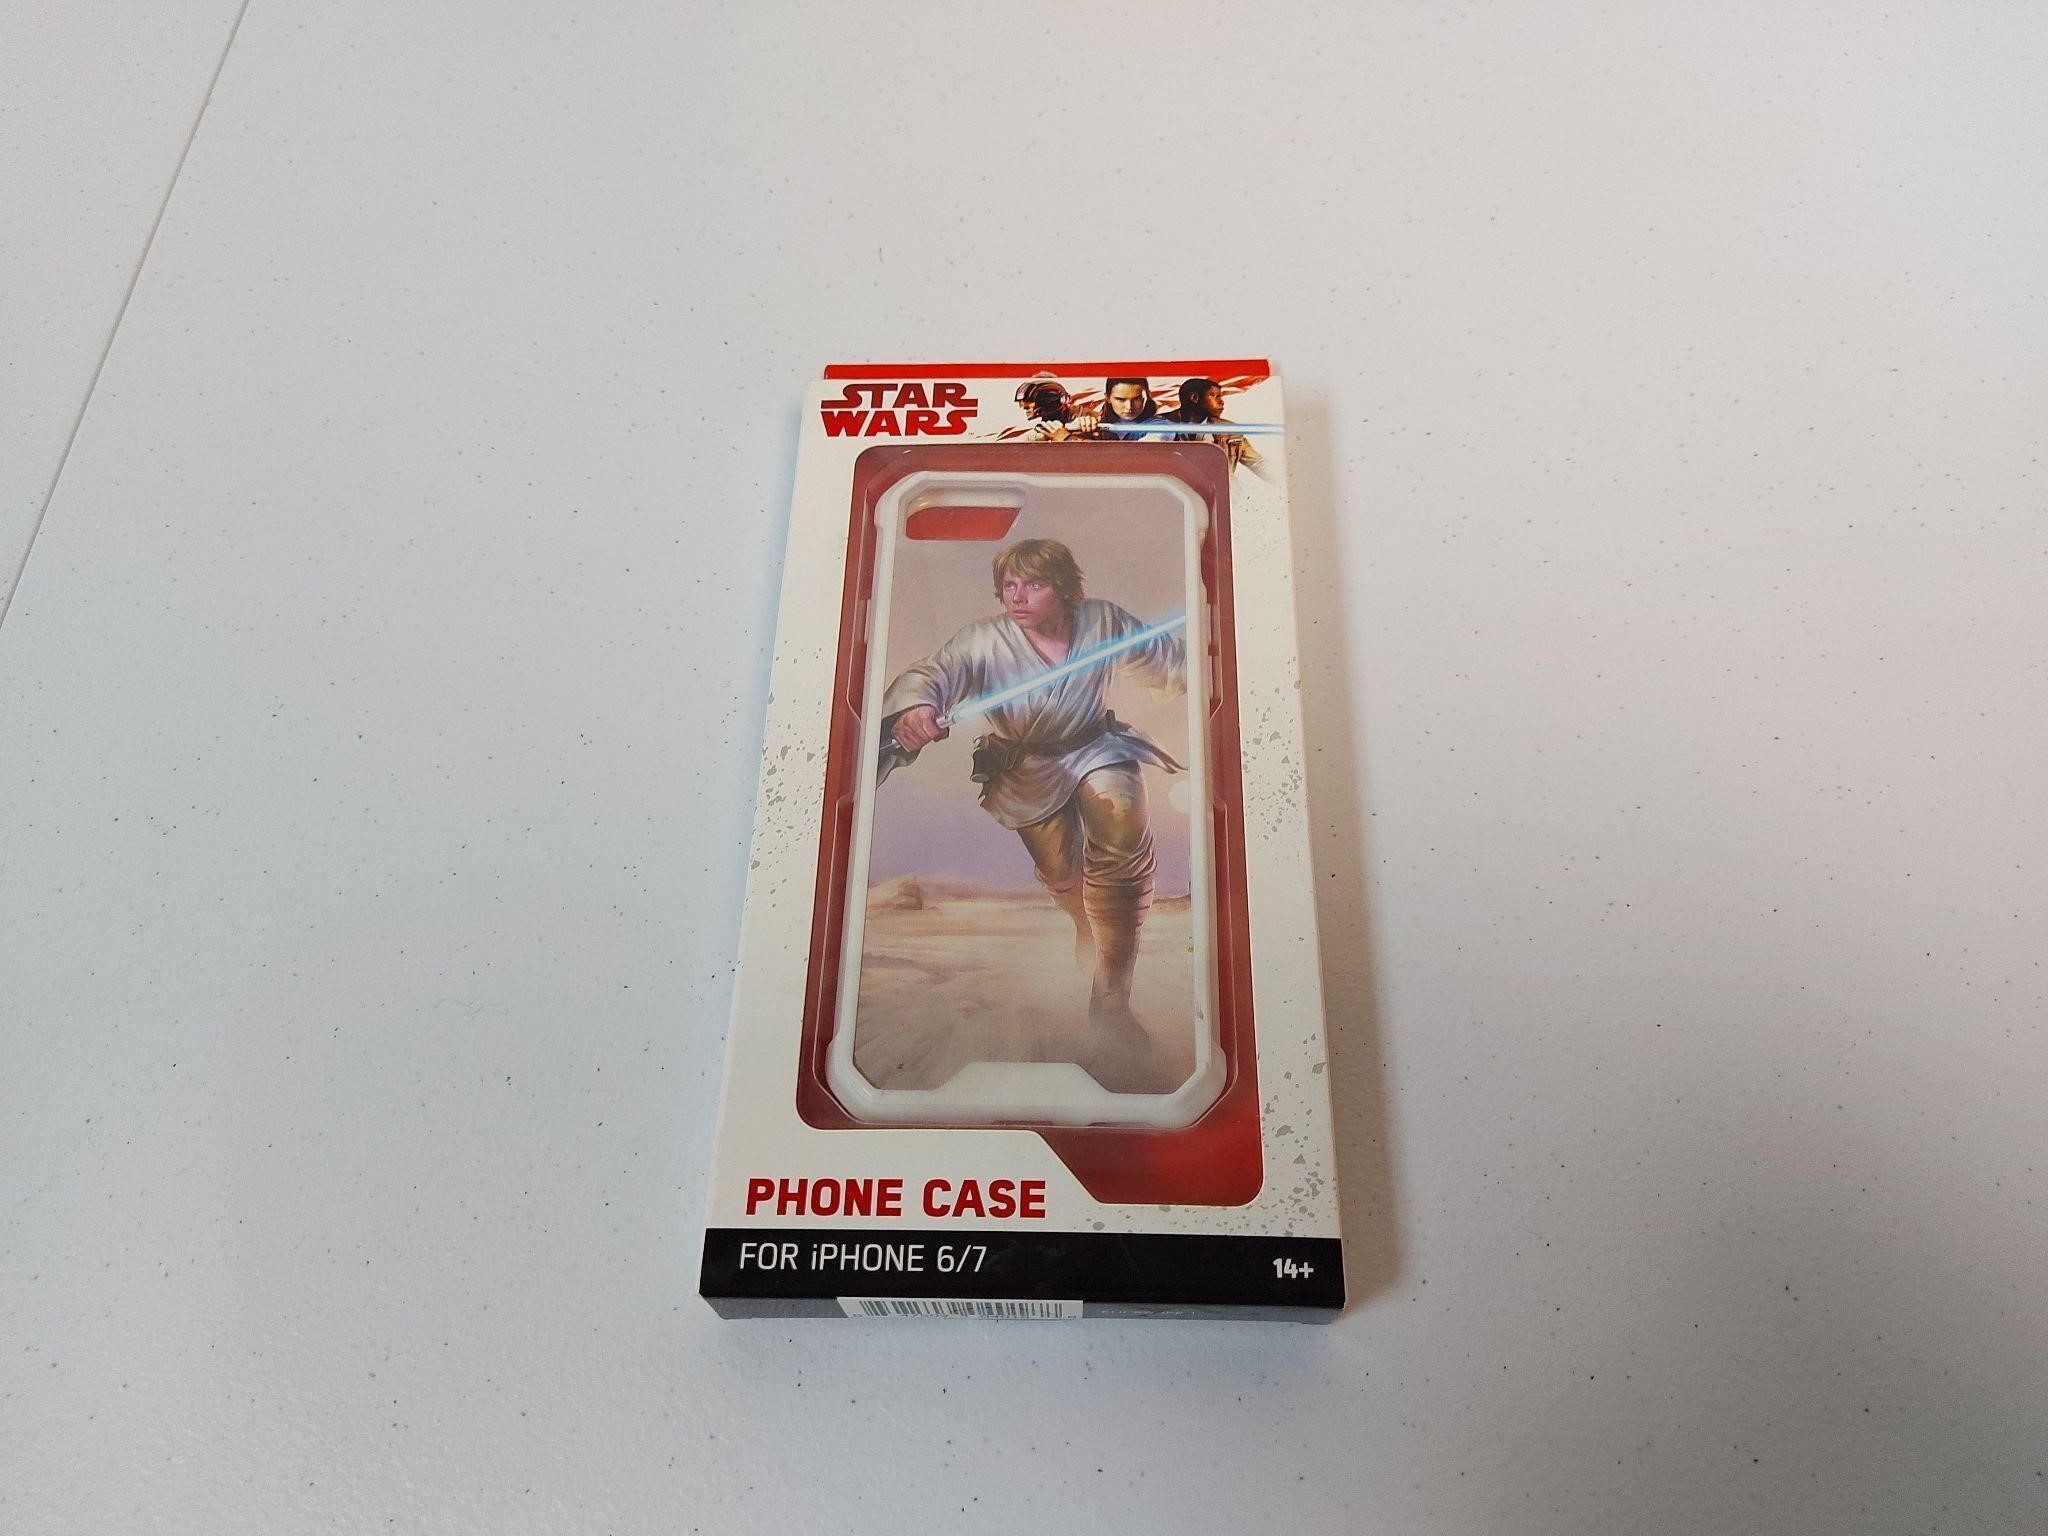 New Star Wars Phone Case for iPhone 6/7